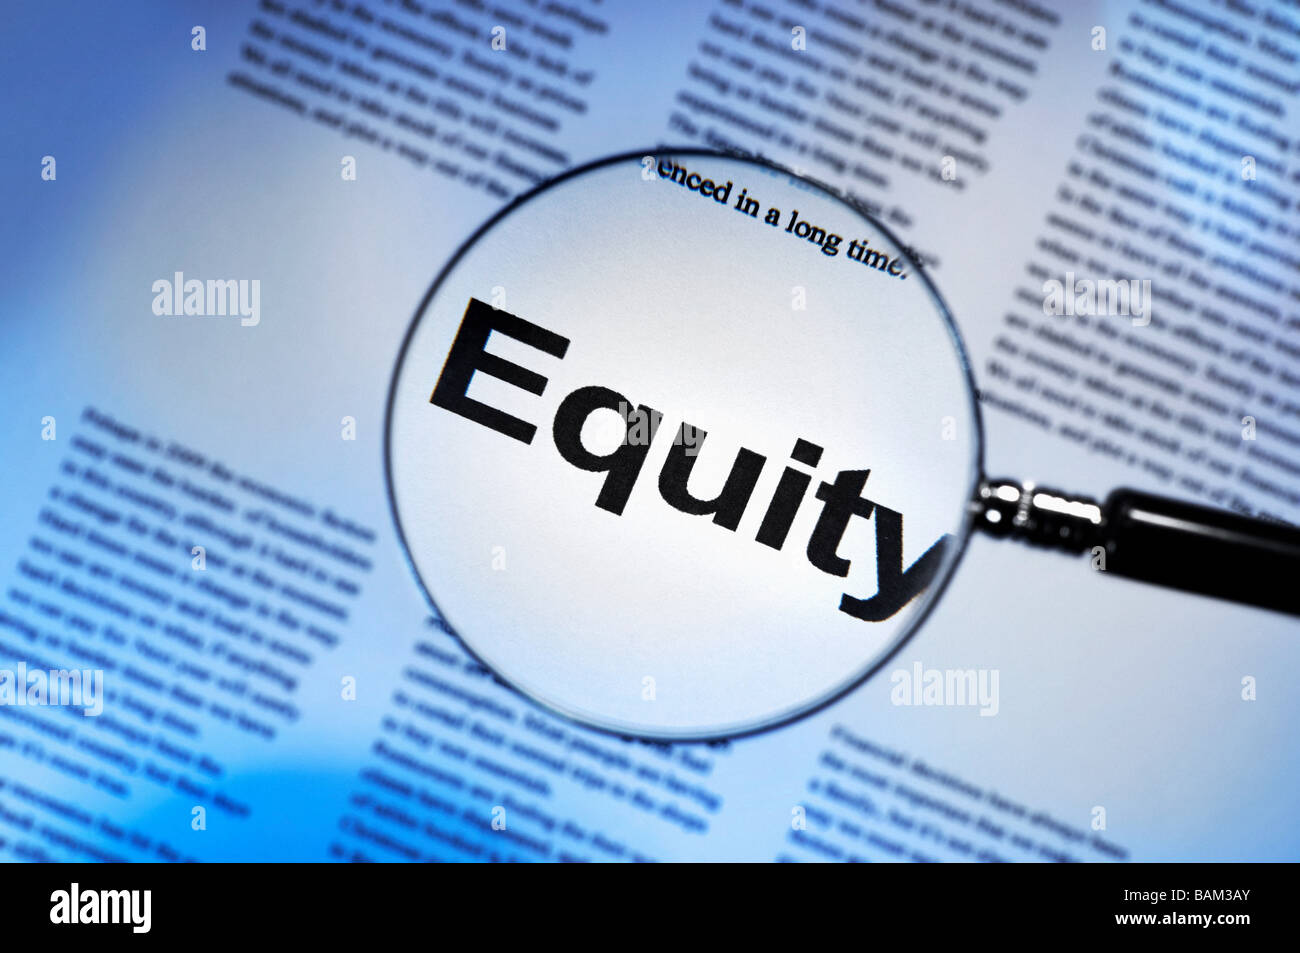 Word equity under magnifying glass Stock Photo